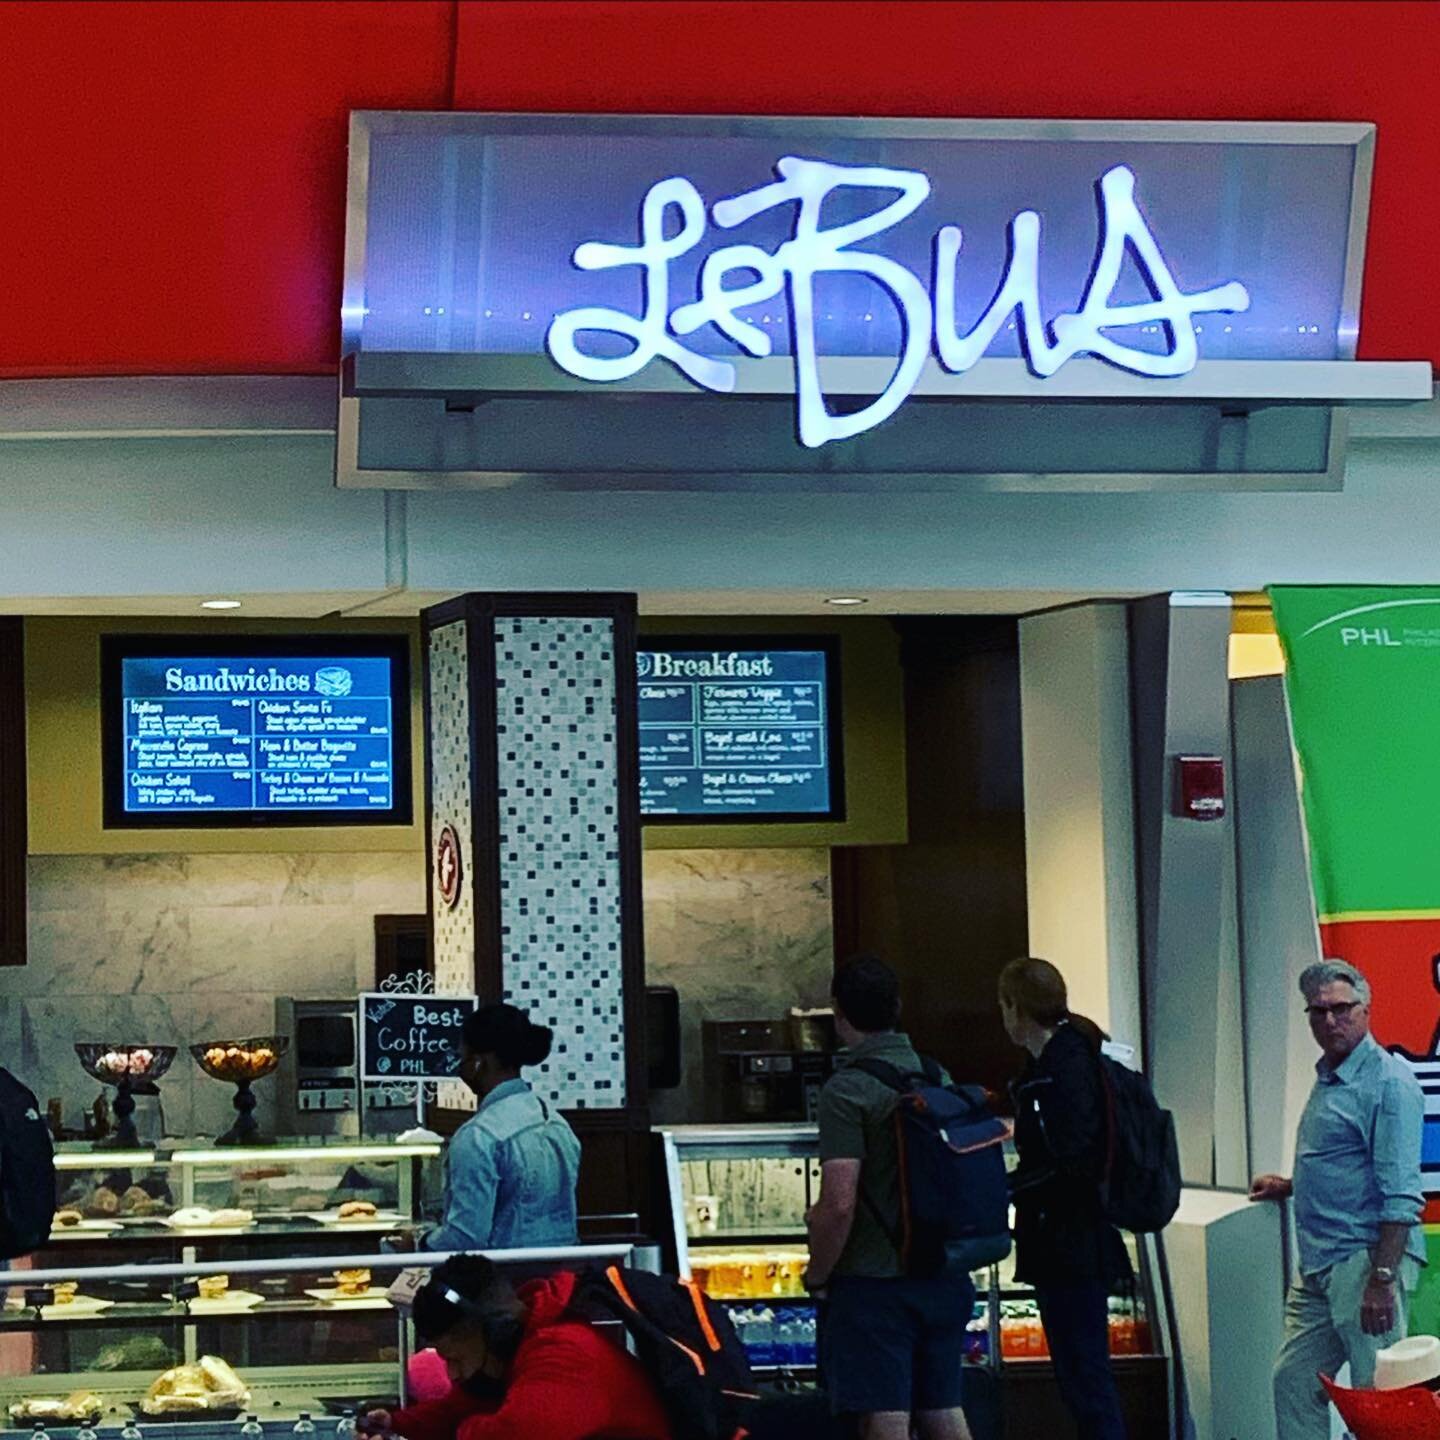 At the airport this morning, I spotted one of my dad&rsquo;s favorite places to stop for a muffin&mdash;LeBus. Seriously, if you haven&rsquo;t had one they are wonderful. (Do they still make peaches &amp; cream??). When I was a kid, my dad would take